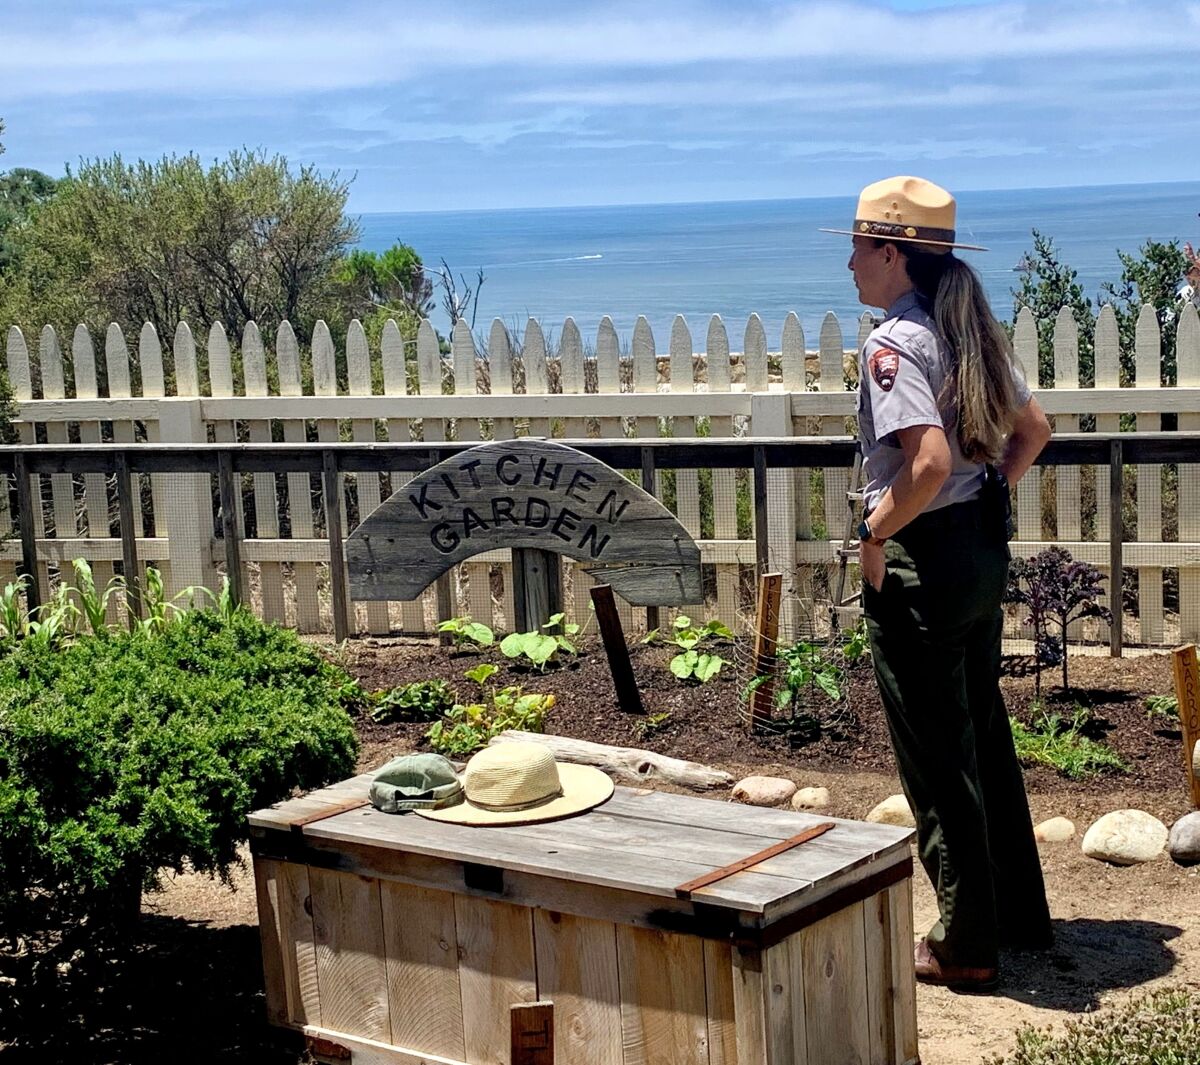 A park ranger stands in the vegetable garden replica of the 1855 Point Loma Lighthouse at Cabrillo National Monument.